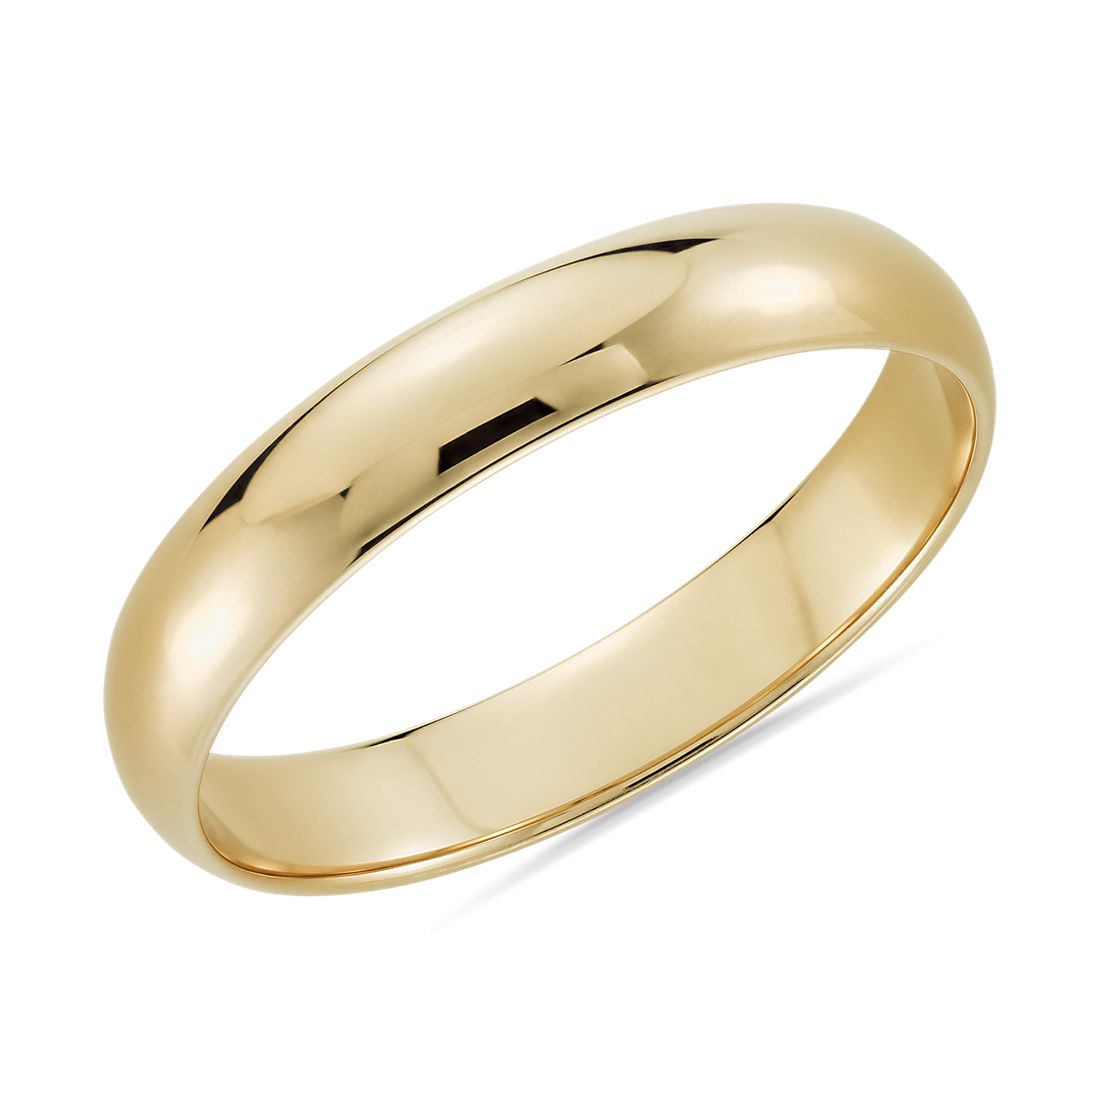 4mm Solid Plain Wedding Band for Men Women Size 4-12 14k Yellow or White Gold